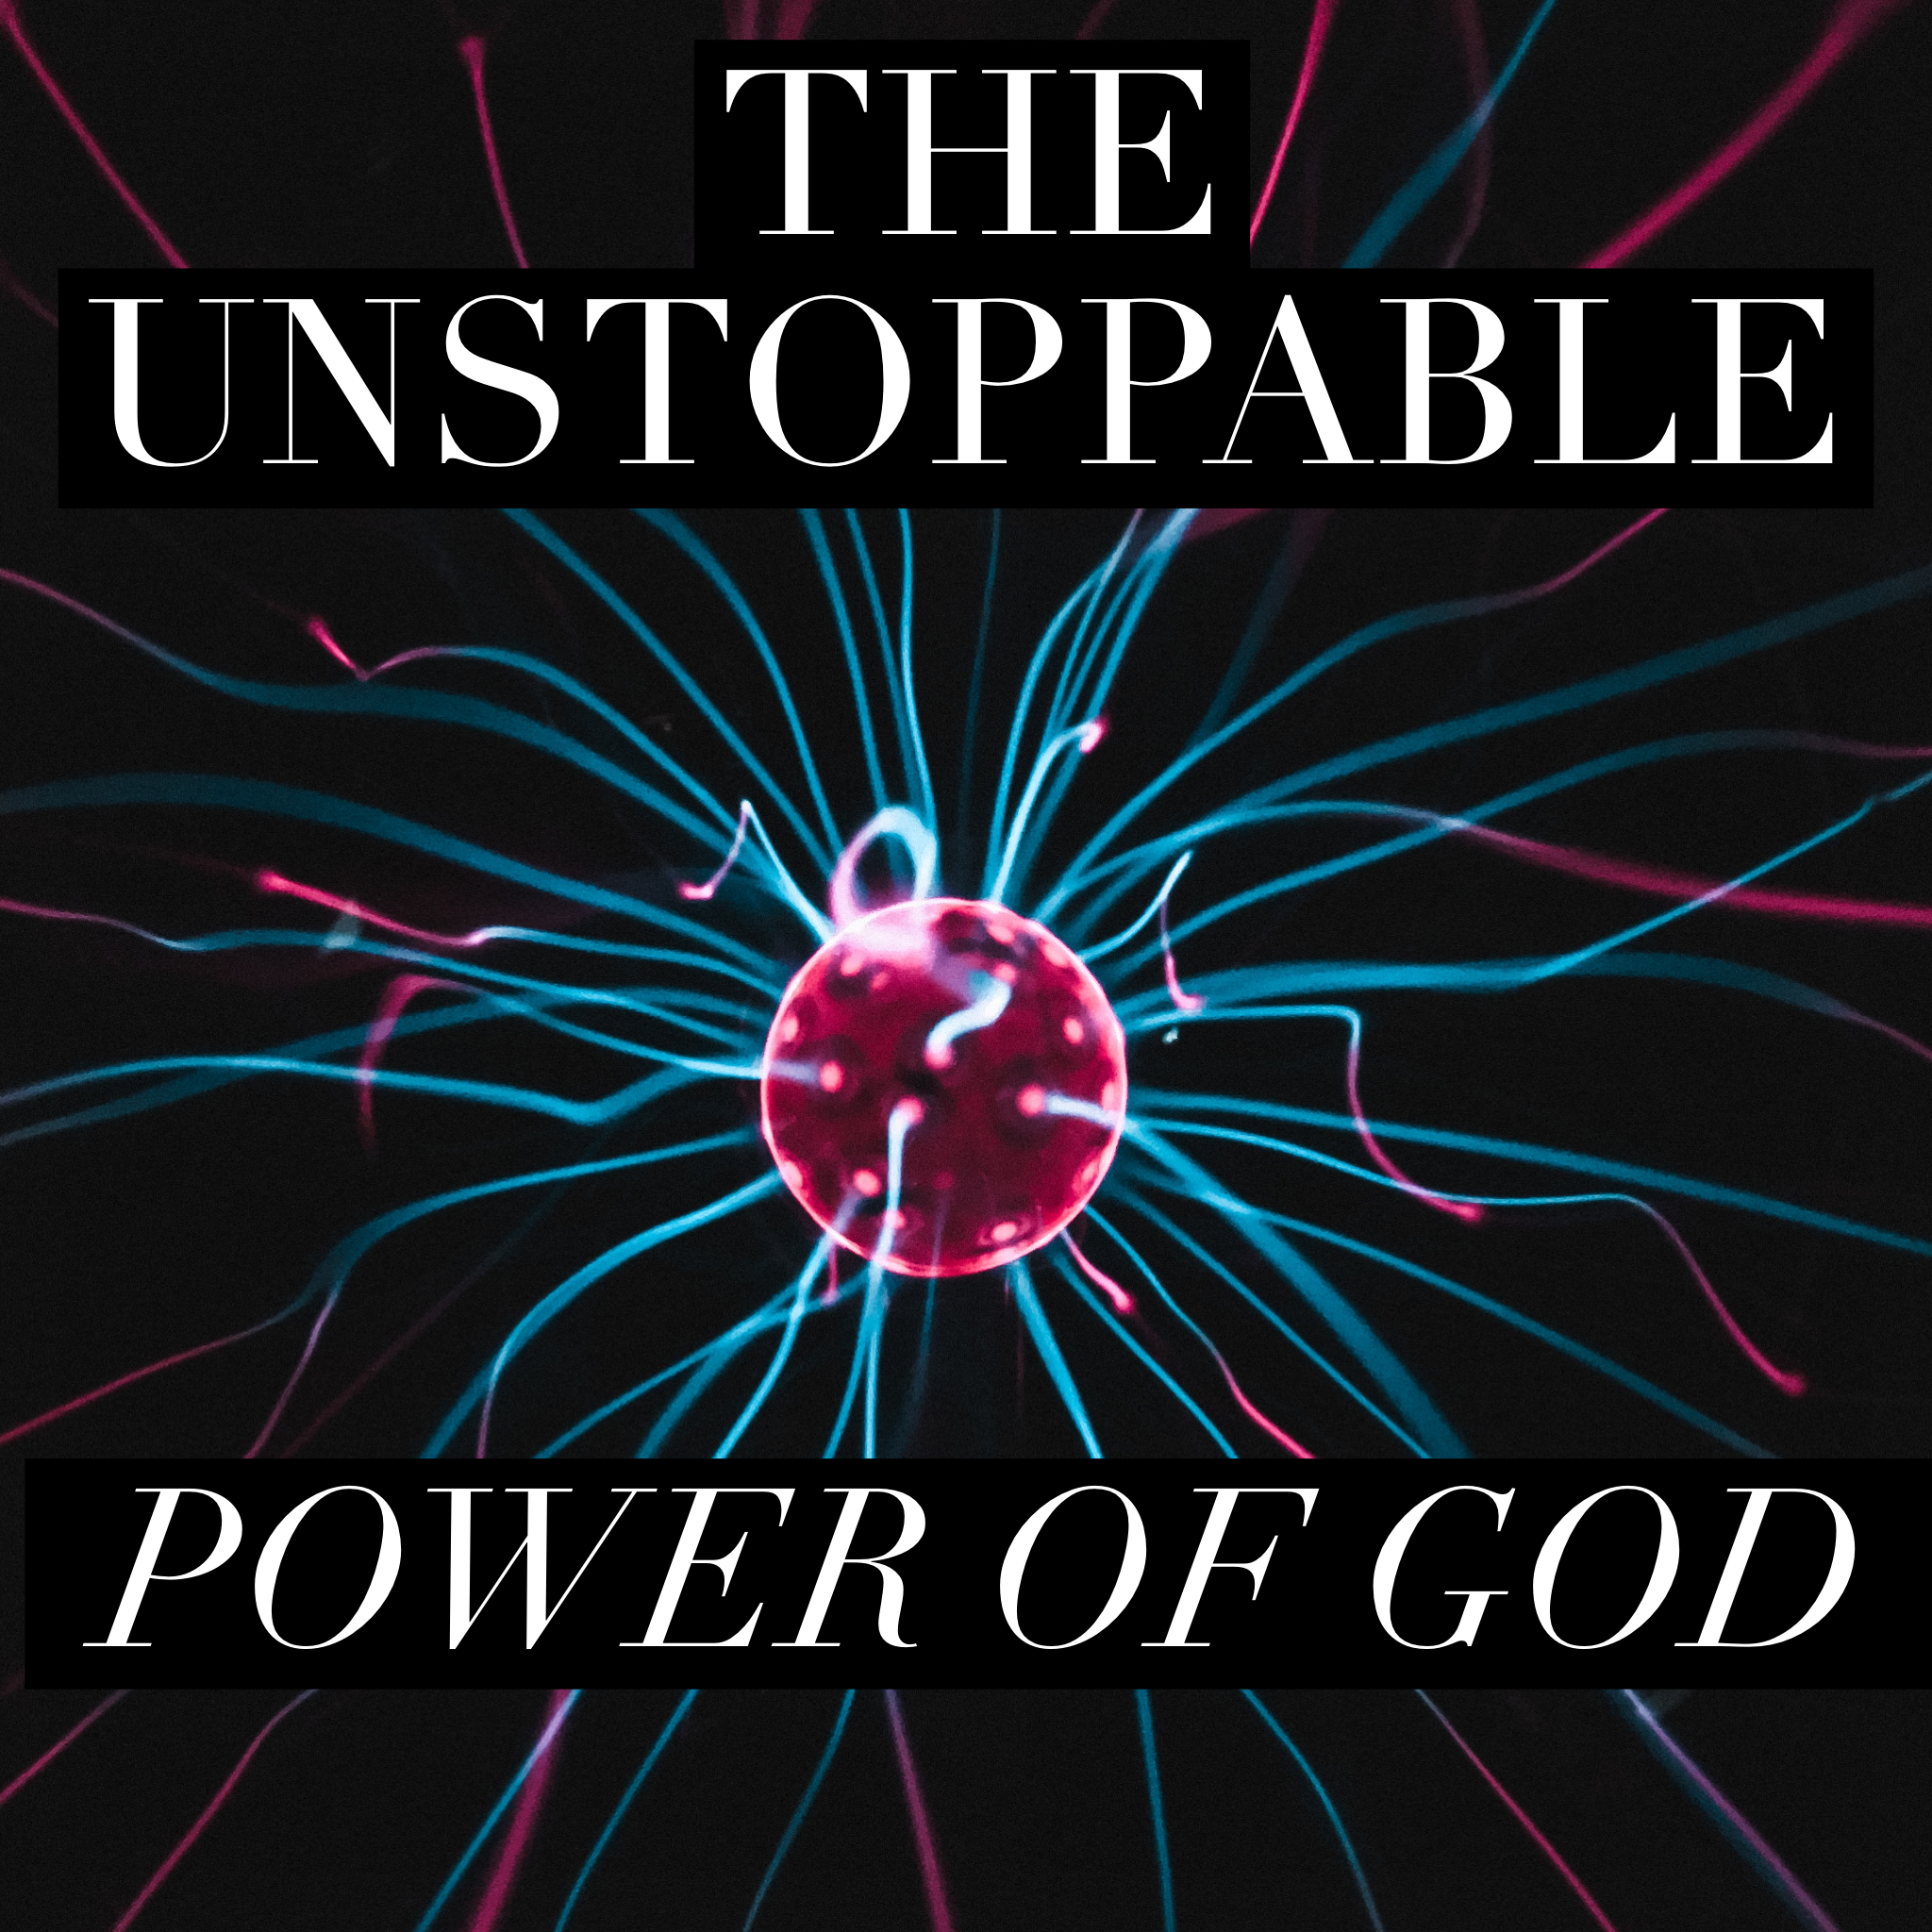 The Unstoppable Power of God - 9/5/21